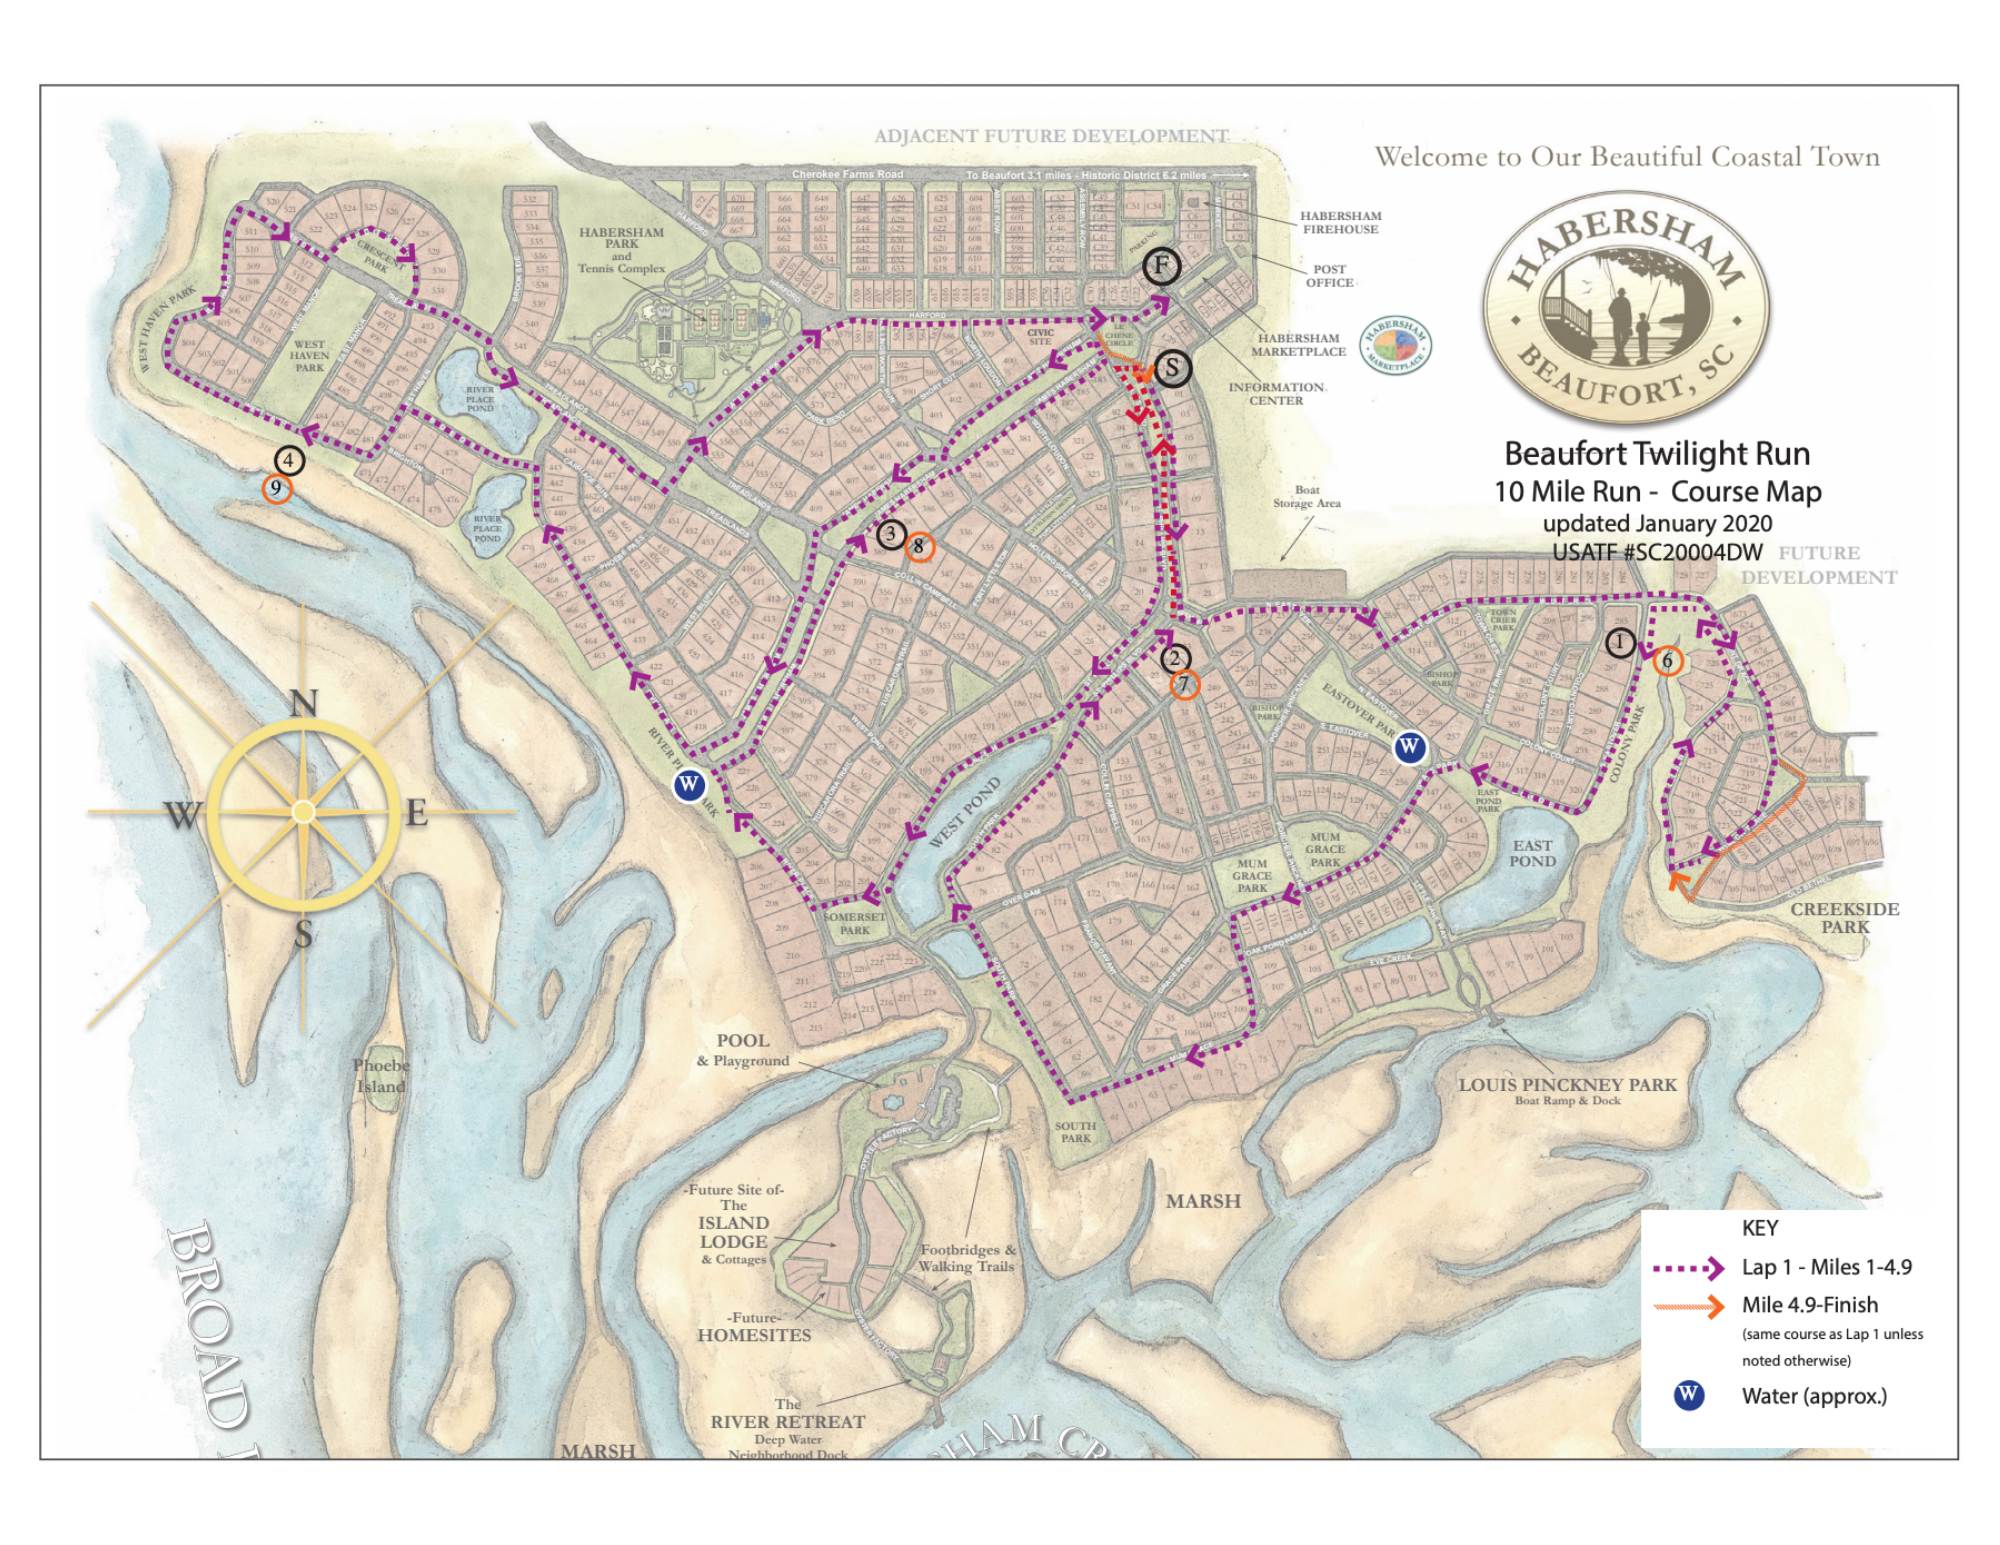 BEAUFORT TWILIGHT RUN TO HOST HUSBAND AND WIFE NATIONAL CHAMPION RUNNERS -  Beaufort Lifestyle